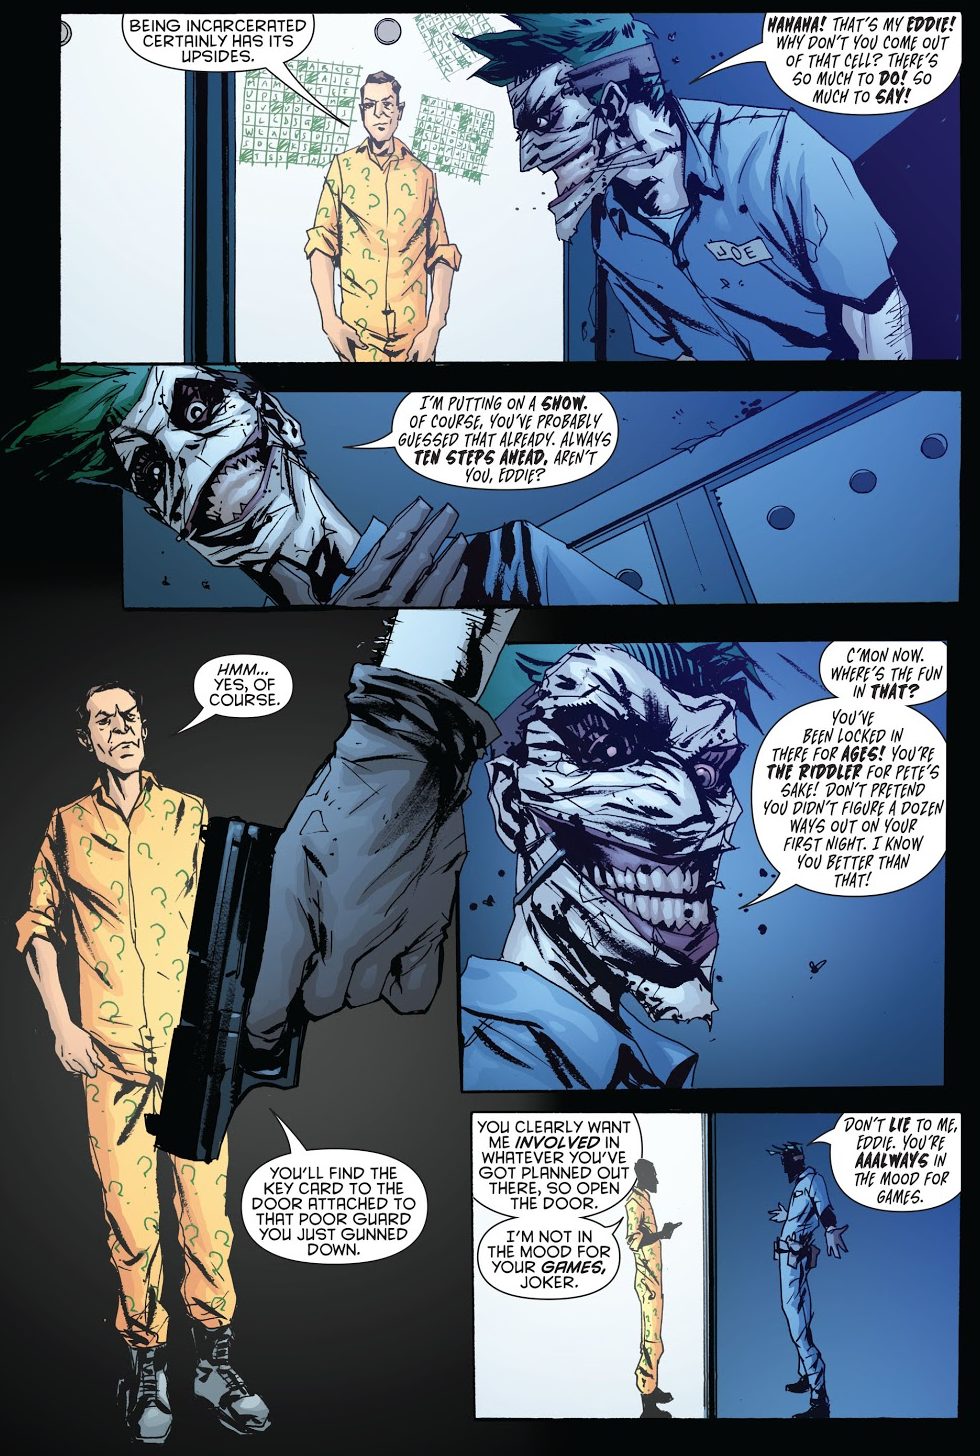 The Joker Recruits The Riddler (Death Of The Family)